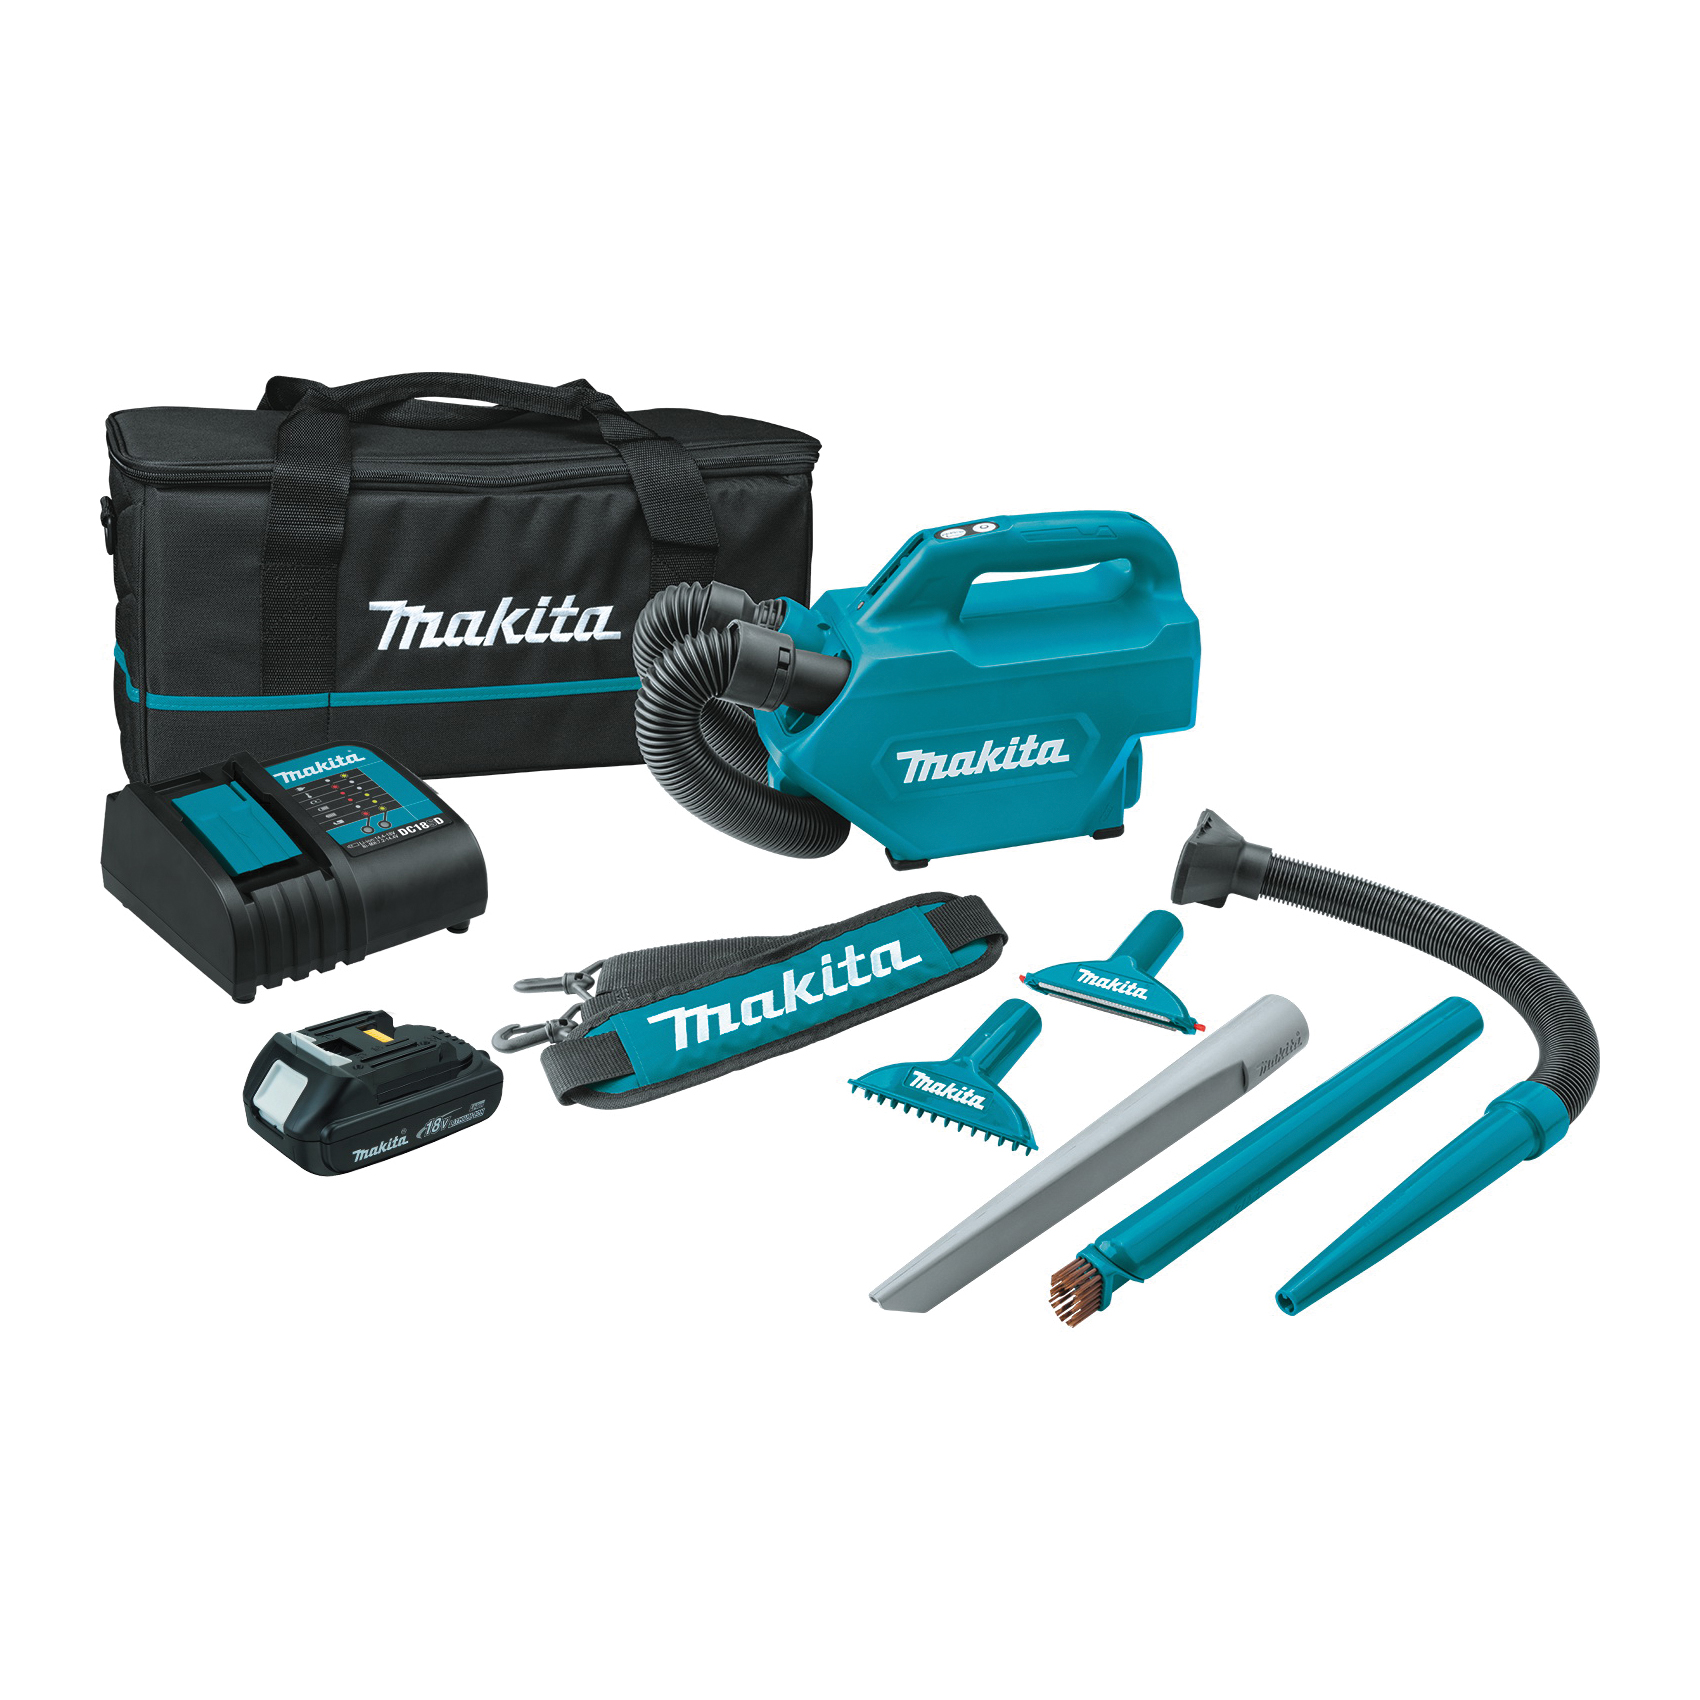 Makita XLC07Z 18V LXT Lithium-Ion Handheld Canister Vacuum, with BL1820B 18V LXT Lithium-Ion Compact 2.0Ah Battery - 4